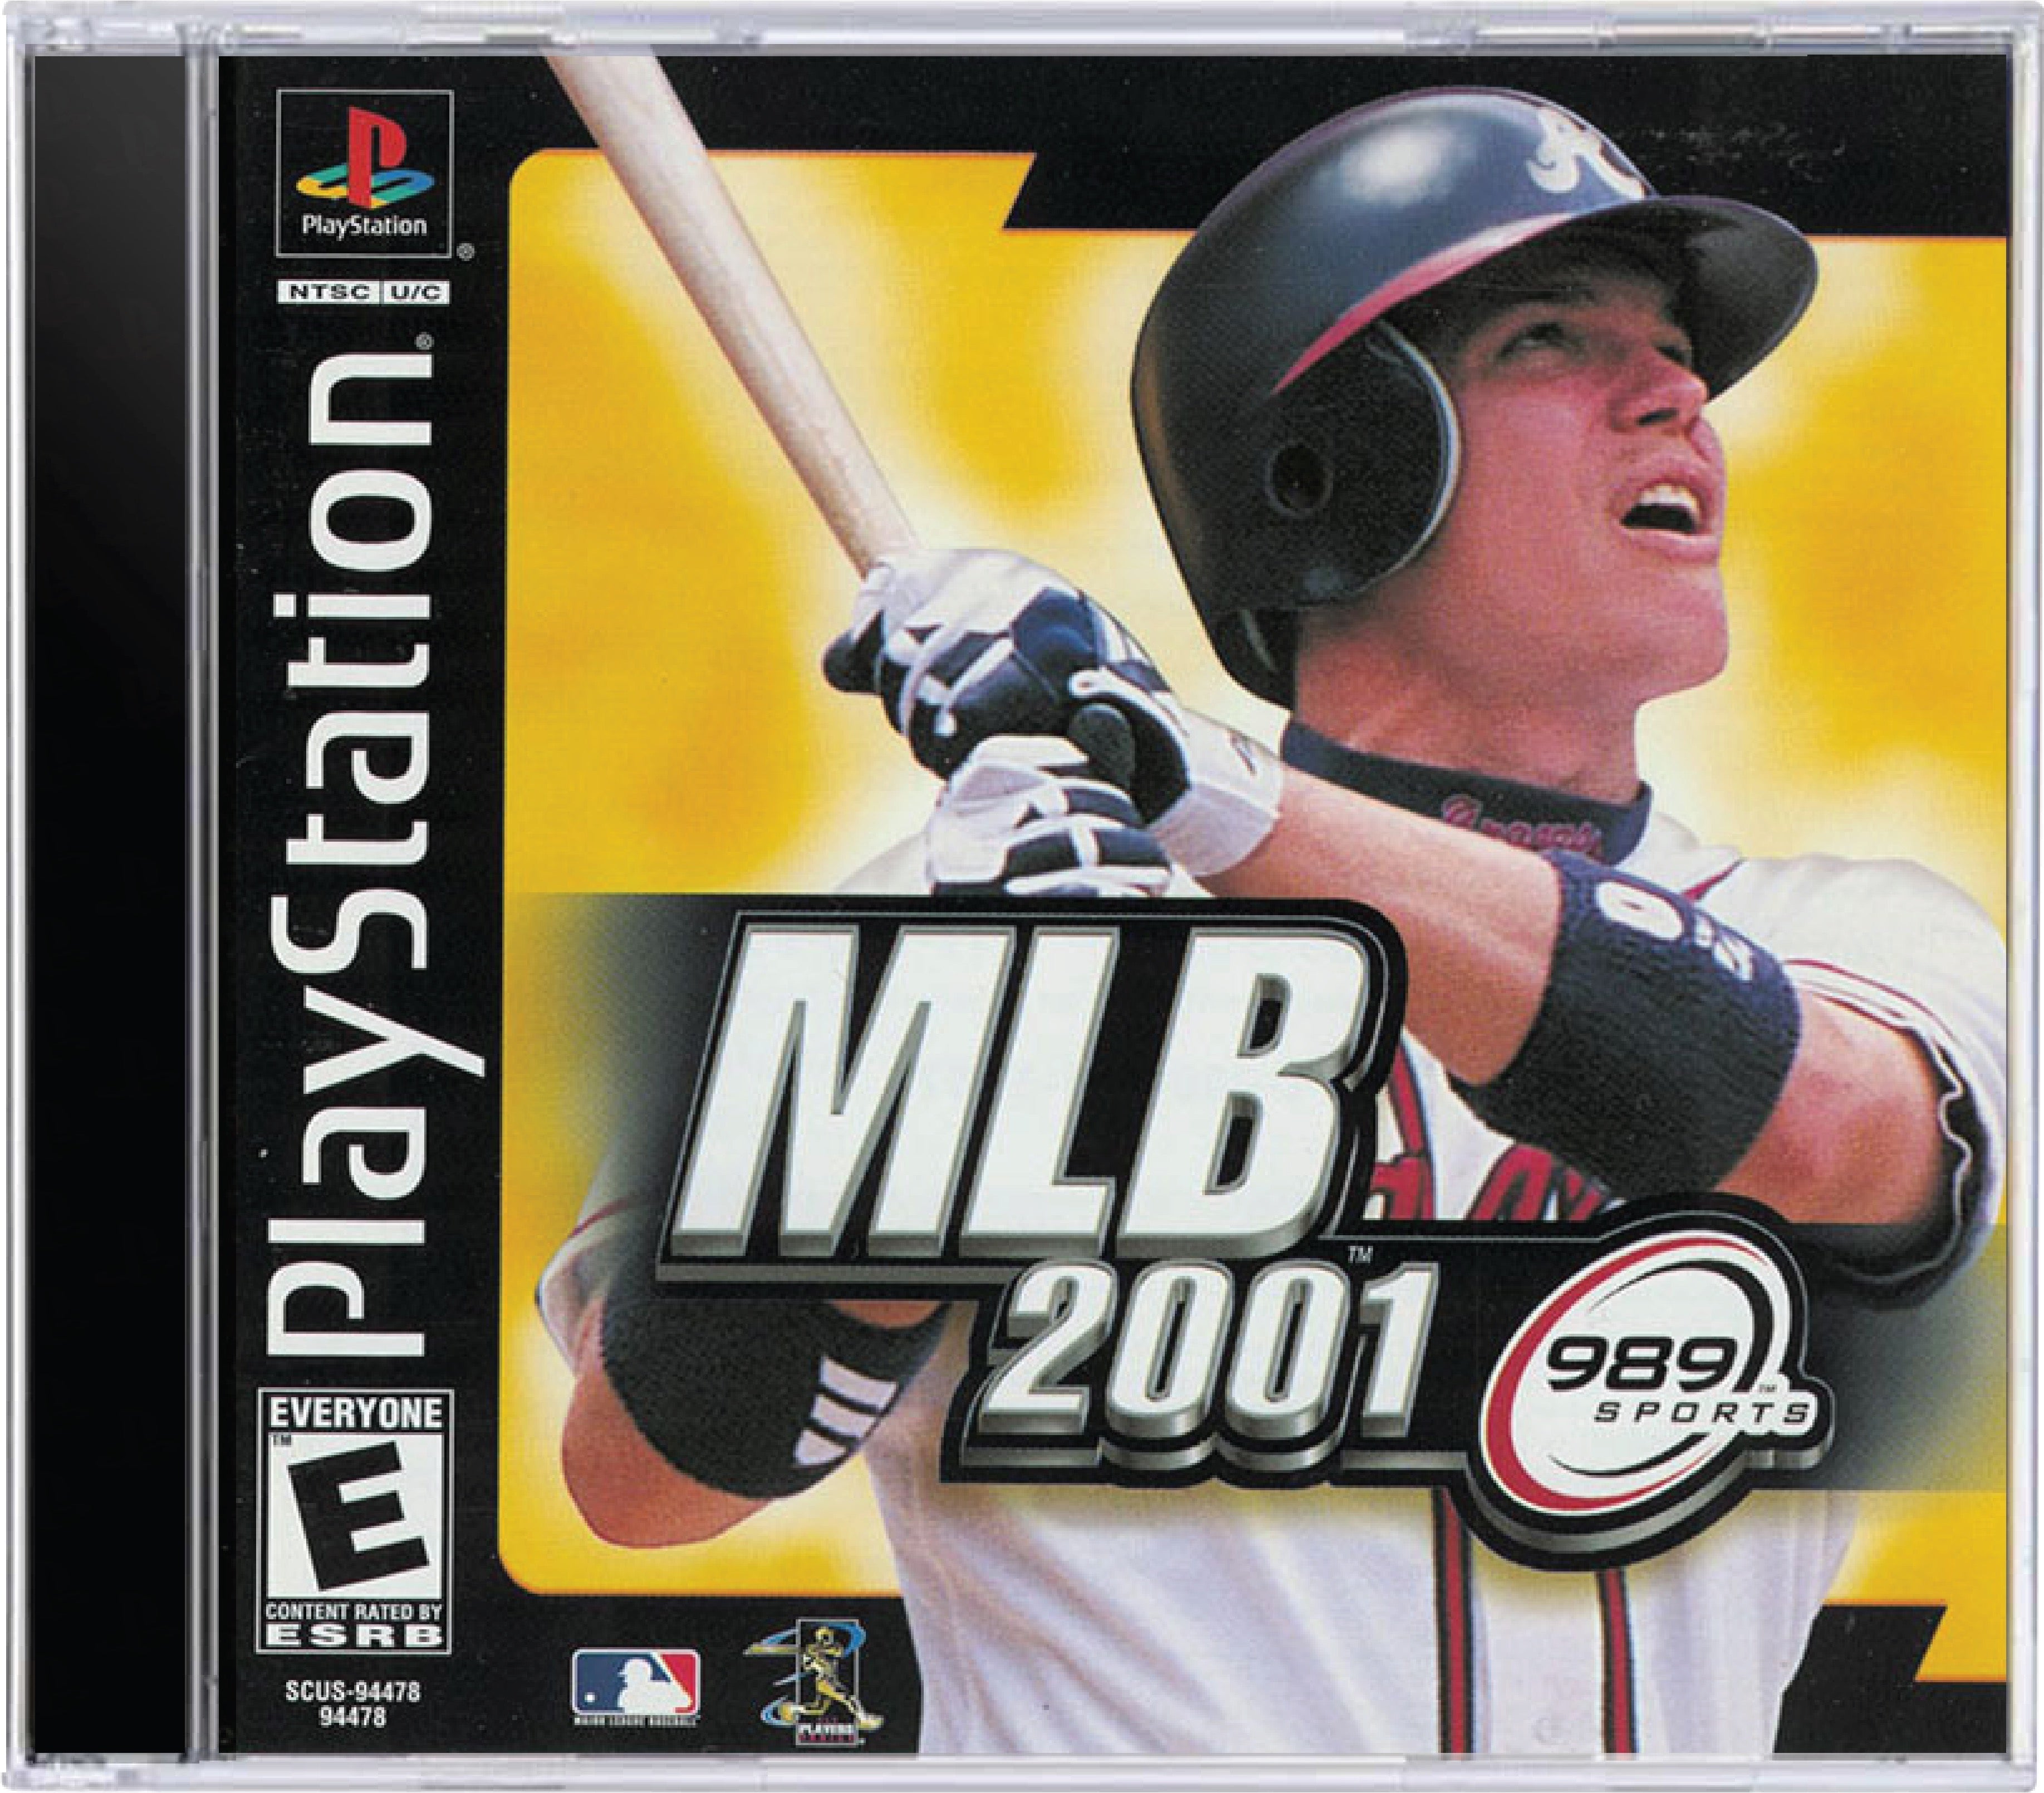 MLB 2001 Cover Art and Product Photo